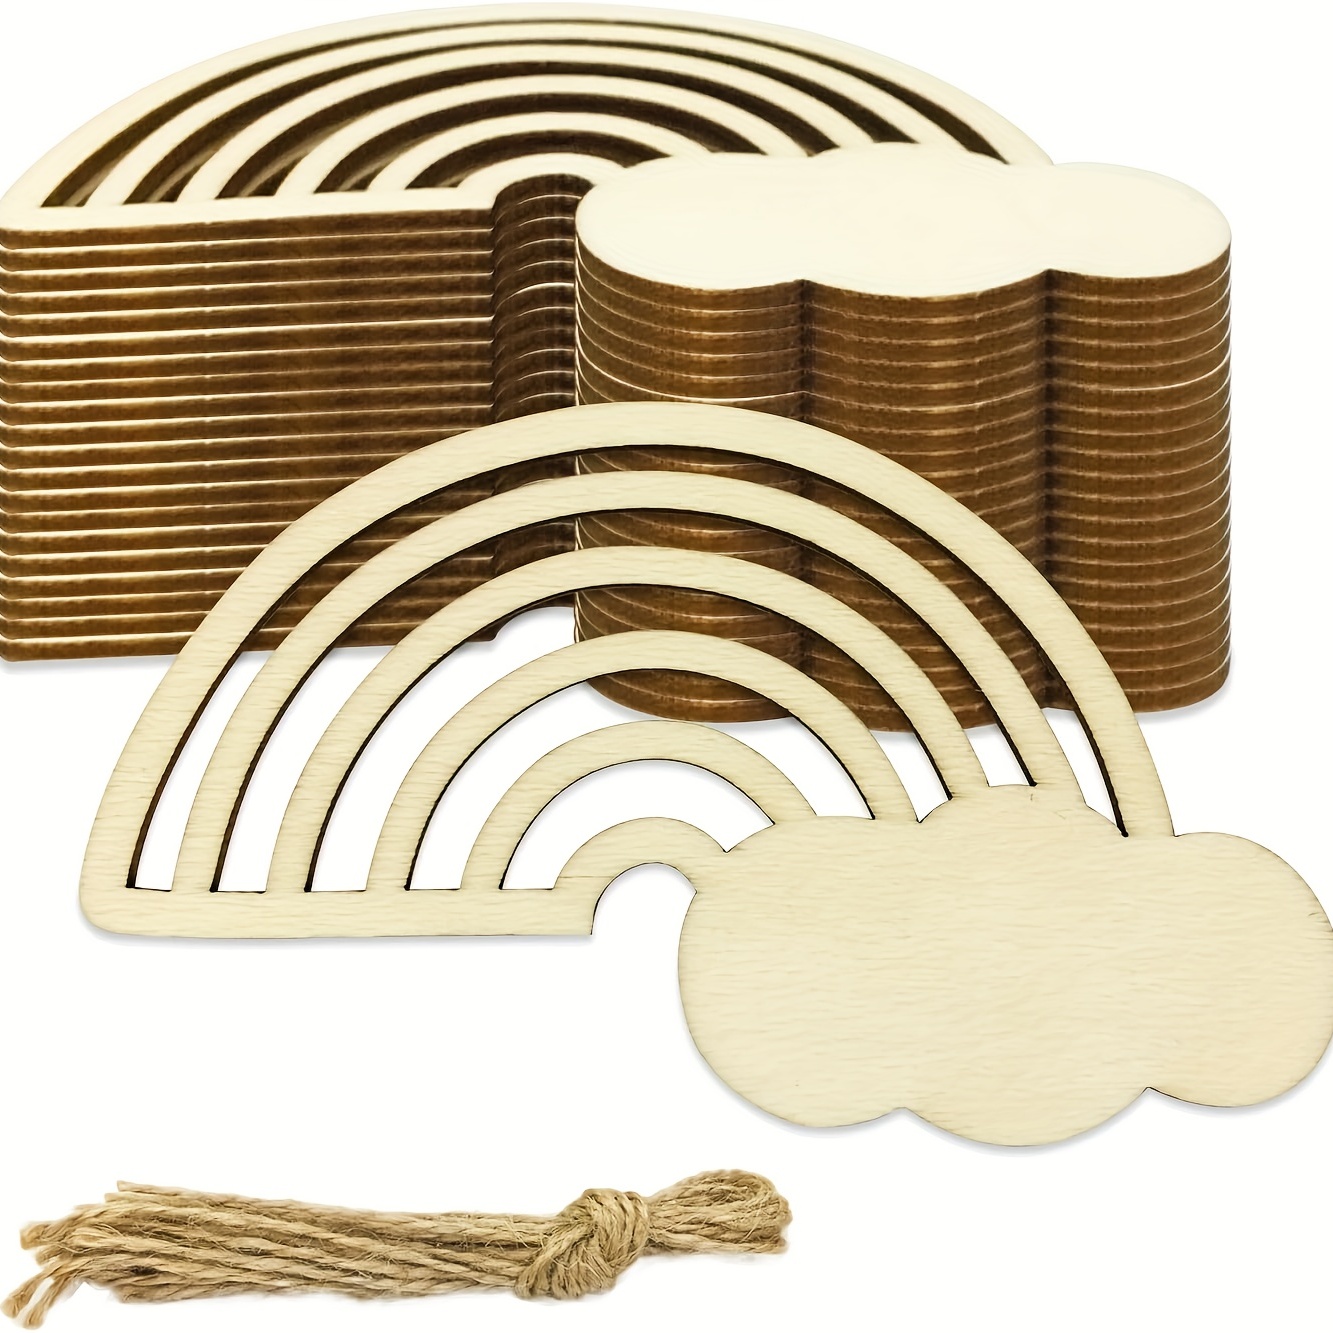 How to Cut Wooden Discs - Weekend Craft